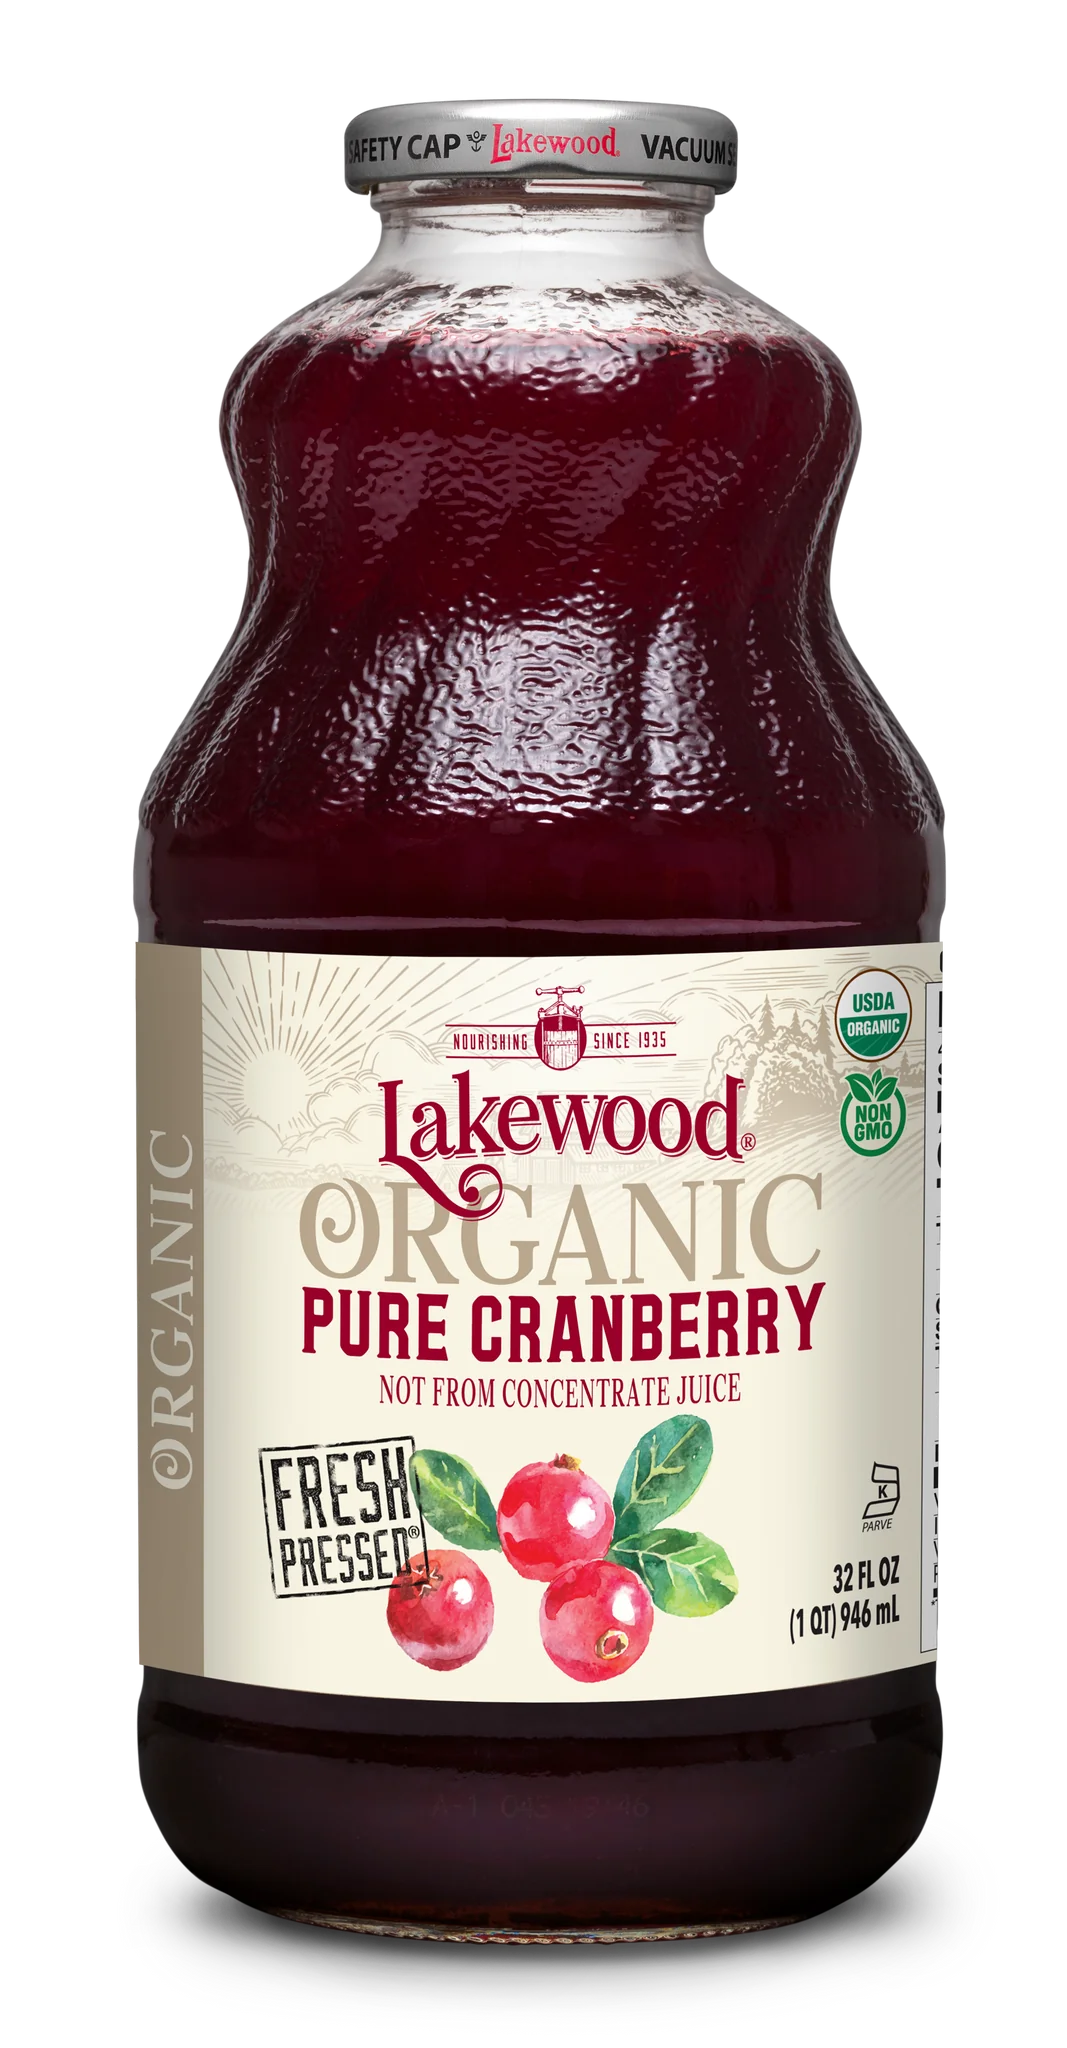 Organic Pure Cranberry Juice by Lakewood, 946 mL